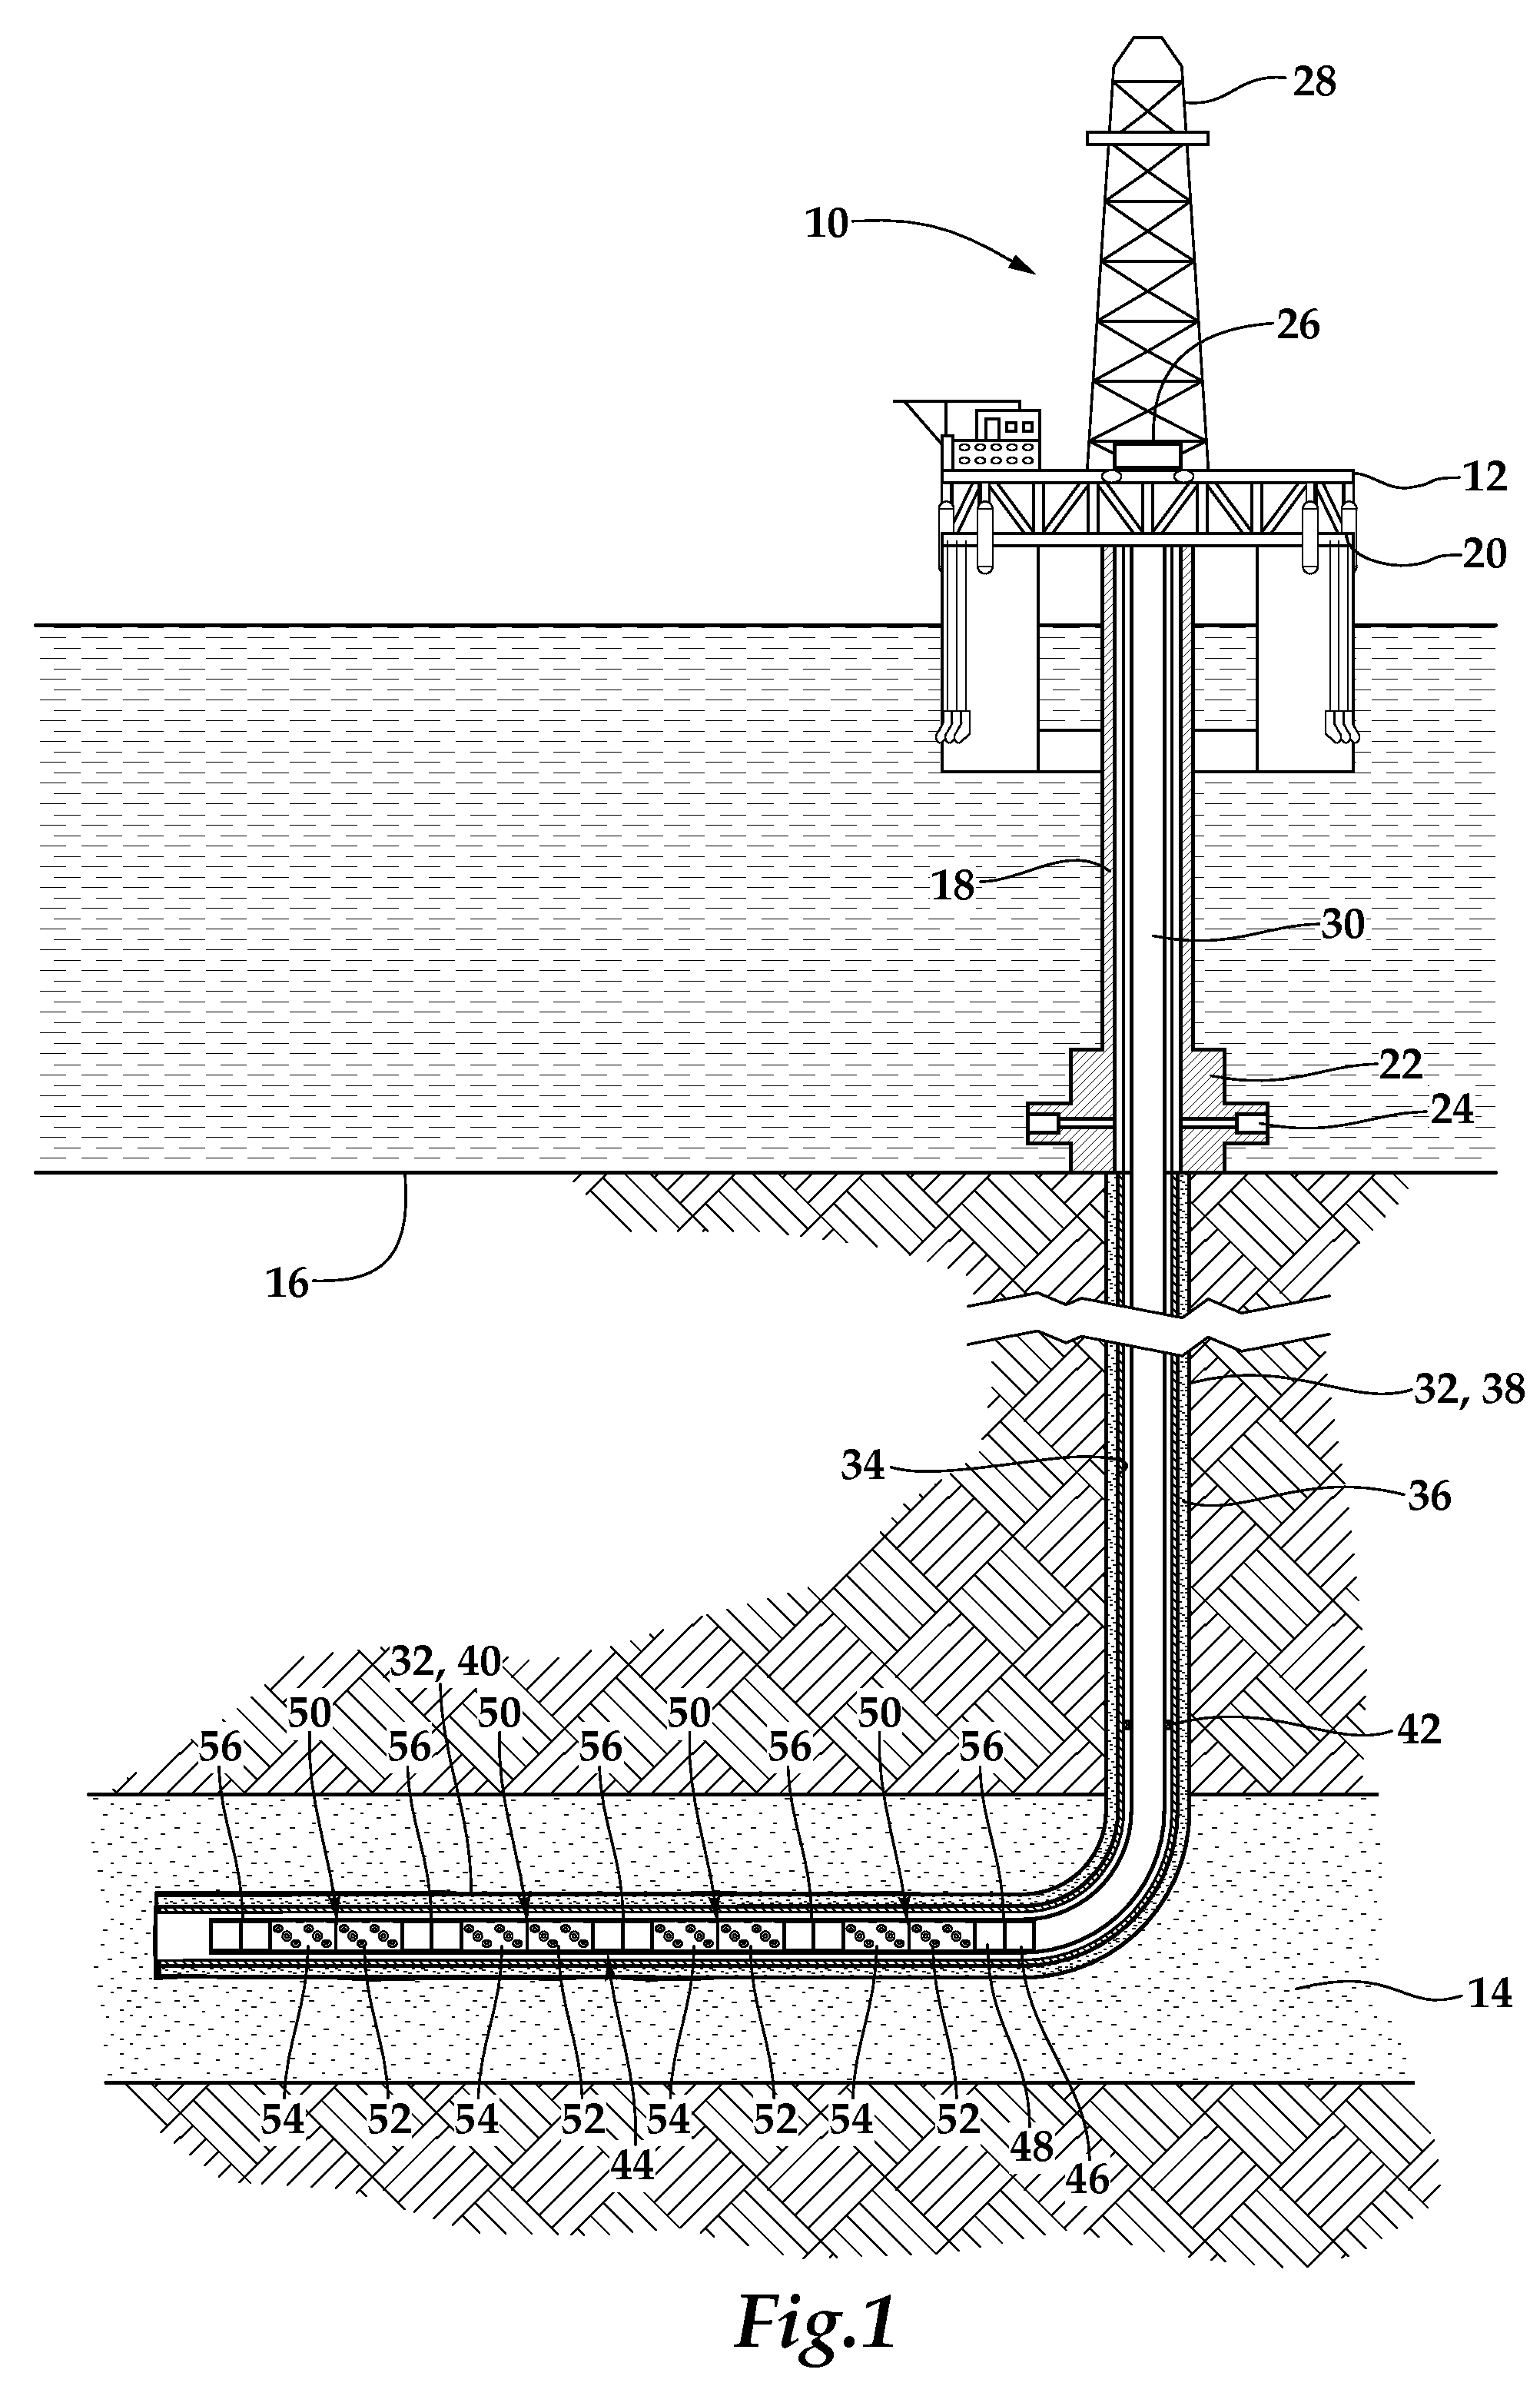 Perforating gun assembly and method for controlling wellbore pressure regimes during perforating